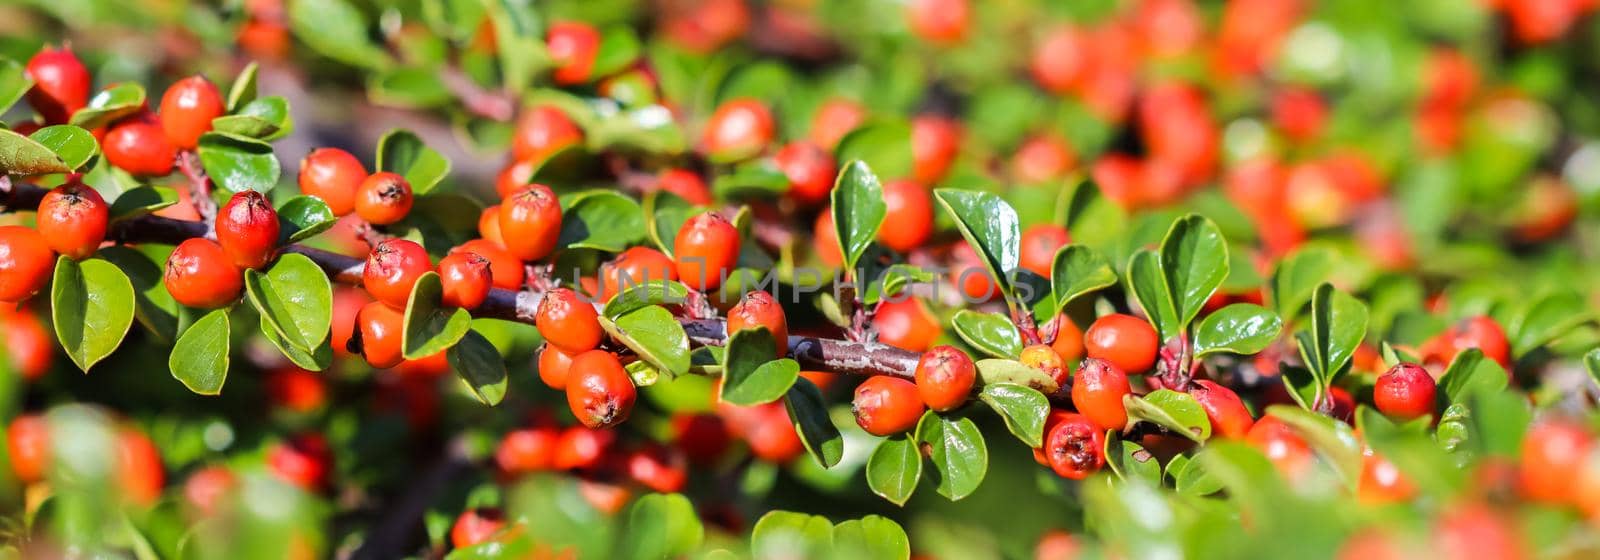 Many red fruits on the branches of a cotoneaster horizontalis bush in the garden in autumn by Olayola